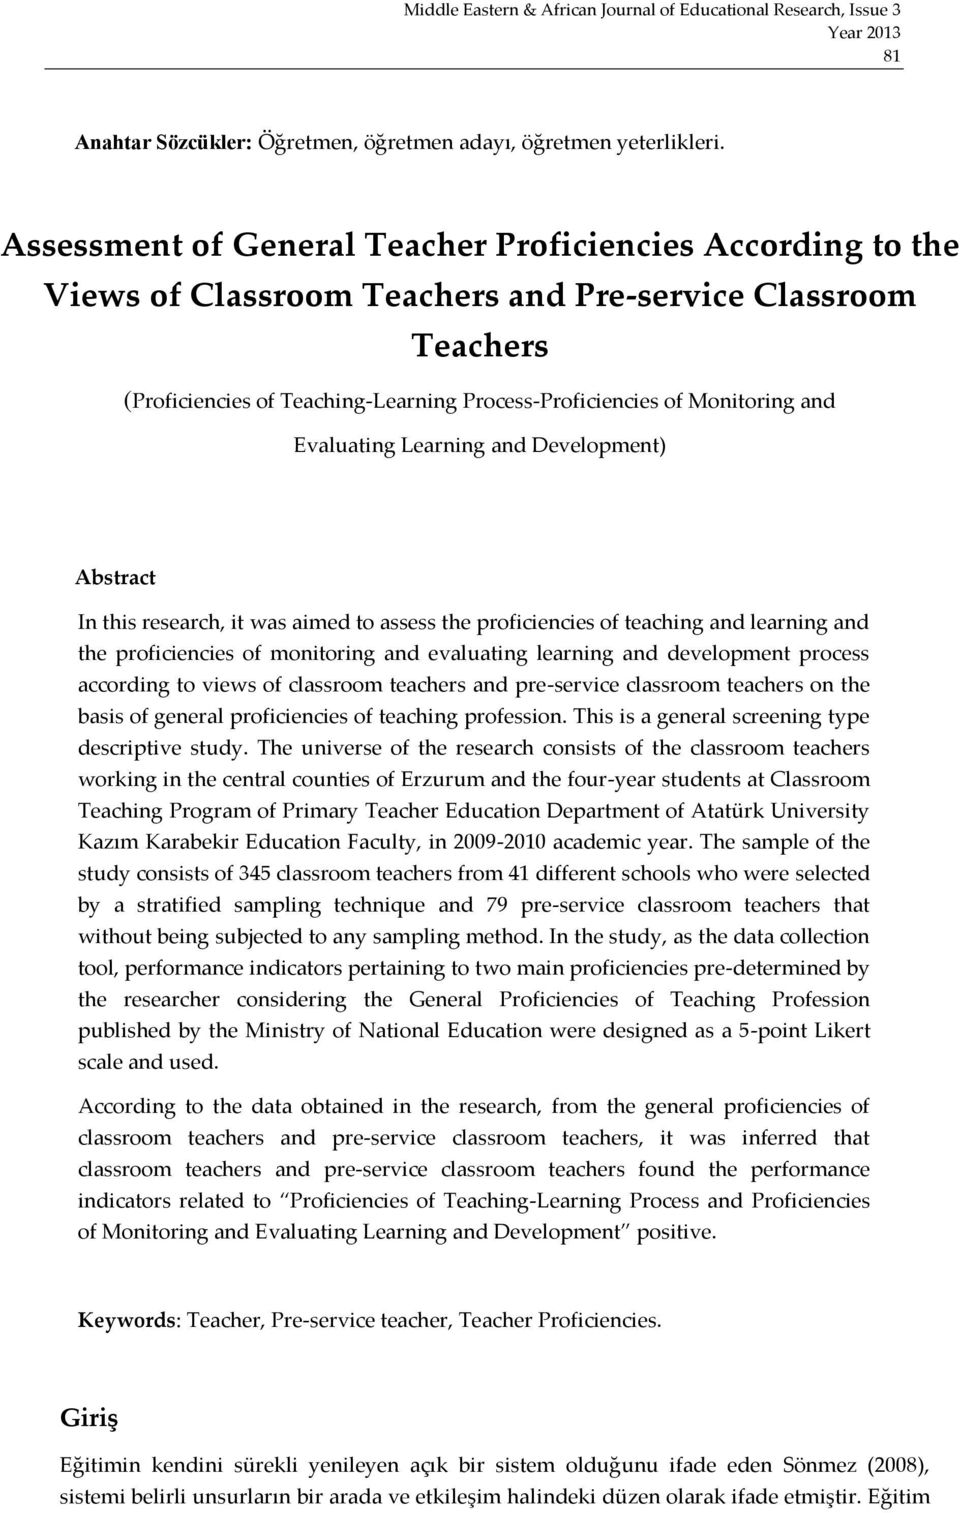 Evaluating Learning and Development) Abstract In this research, it was aimed to assess the proficiencies of teaching and learning and the proficiencies of monitoring and evaluating learning and